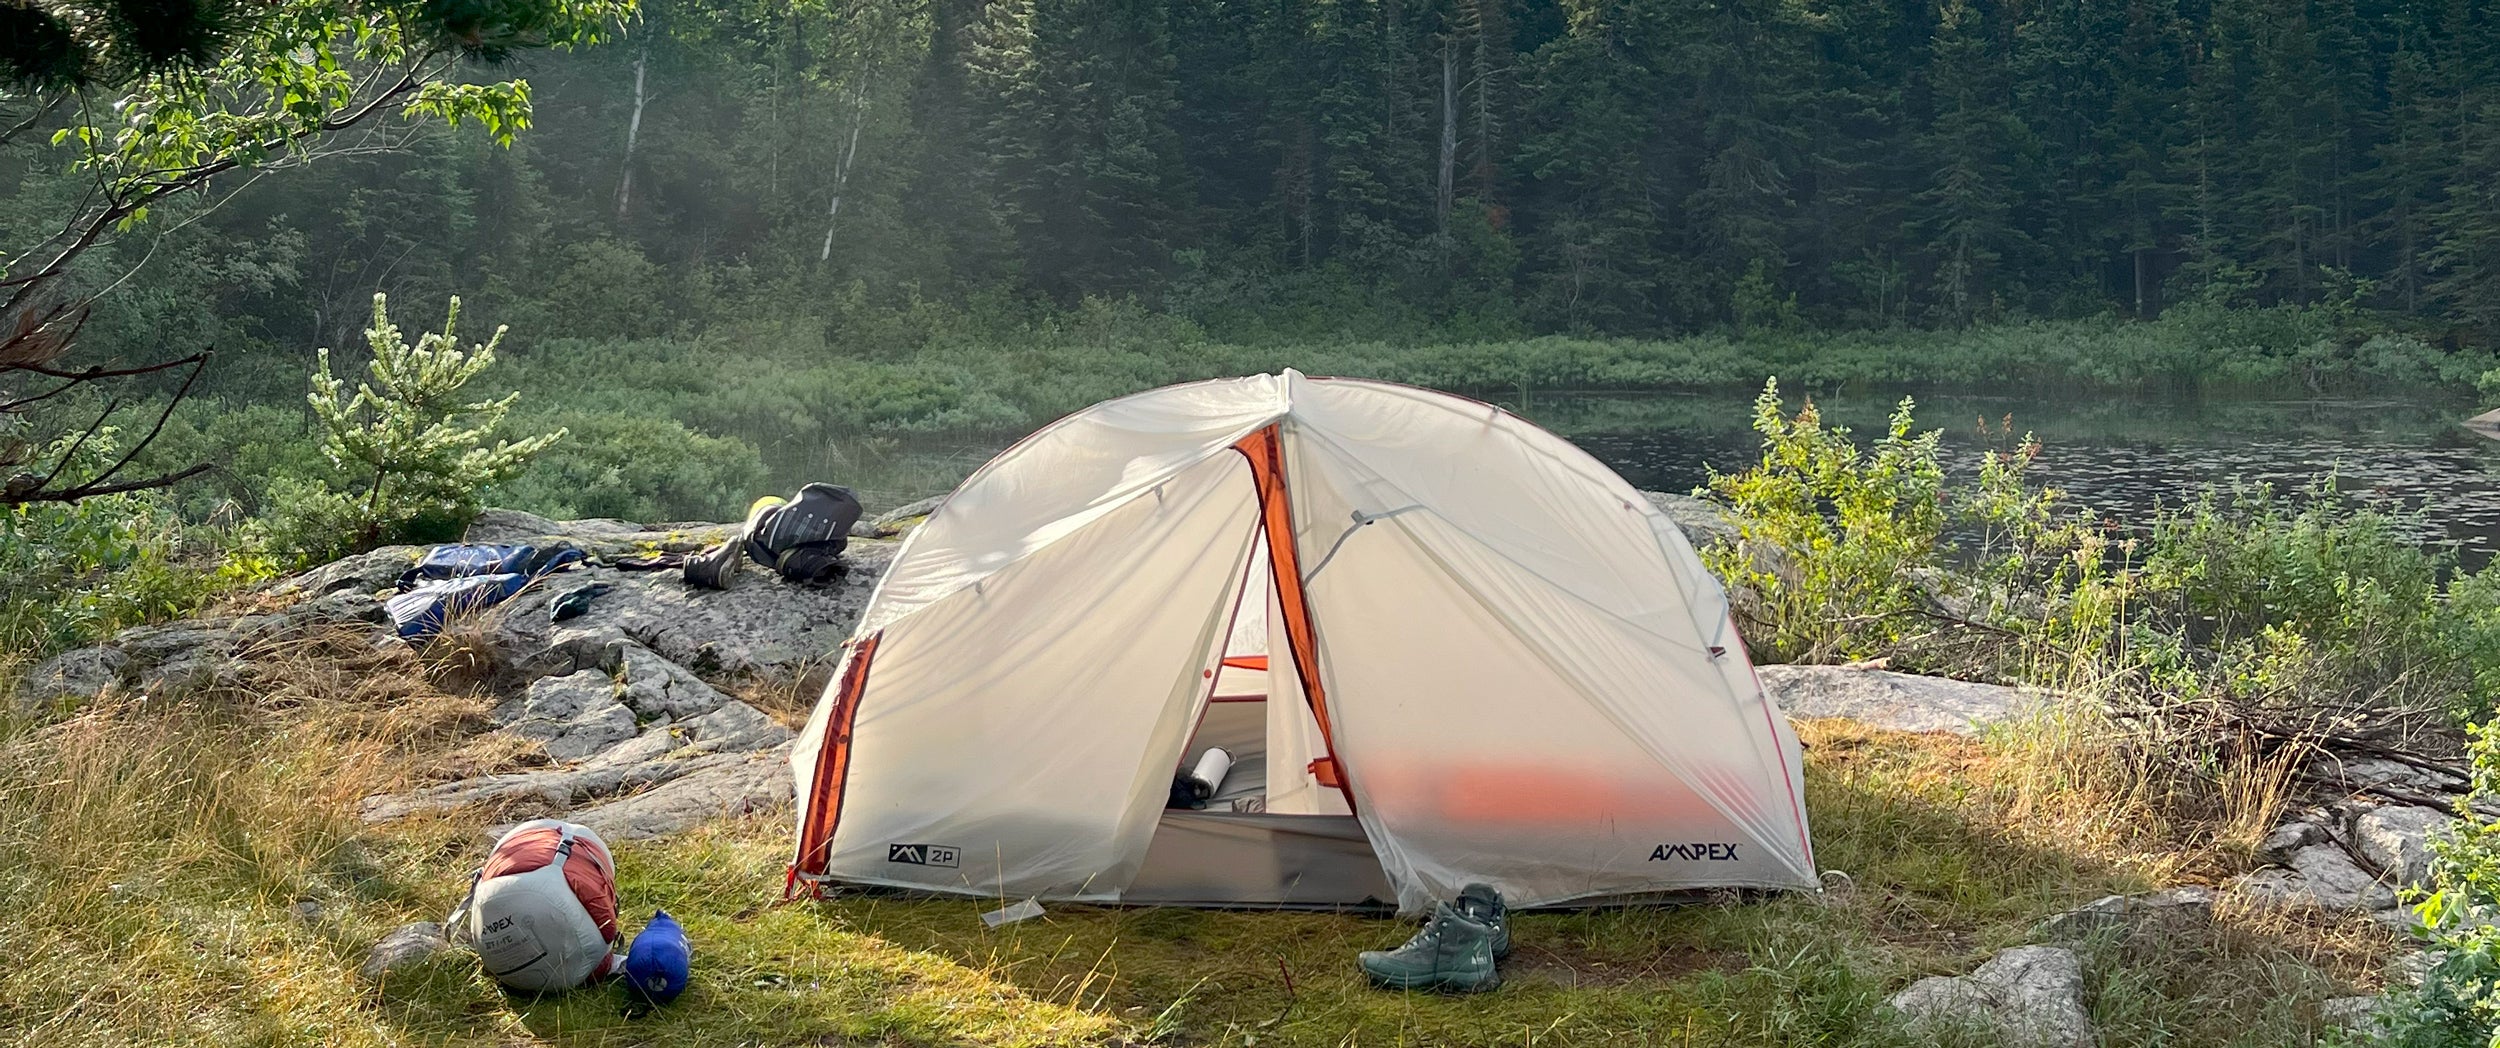 Backpacking 101: Packing Smart for the Perfect Camping Experience with AMPEX